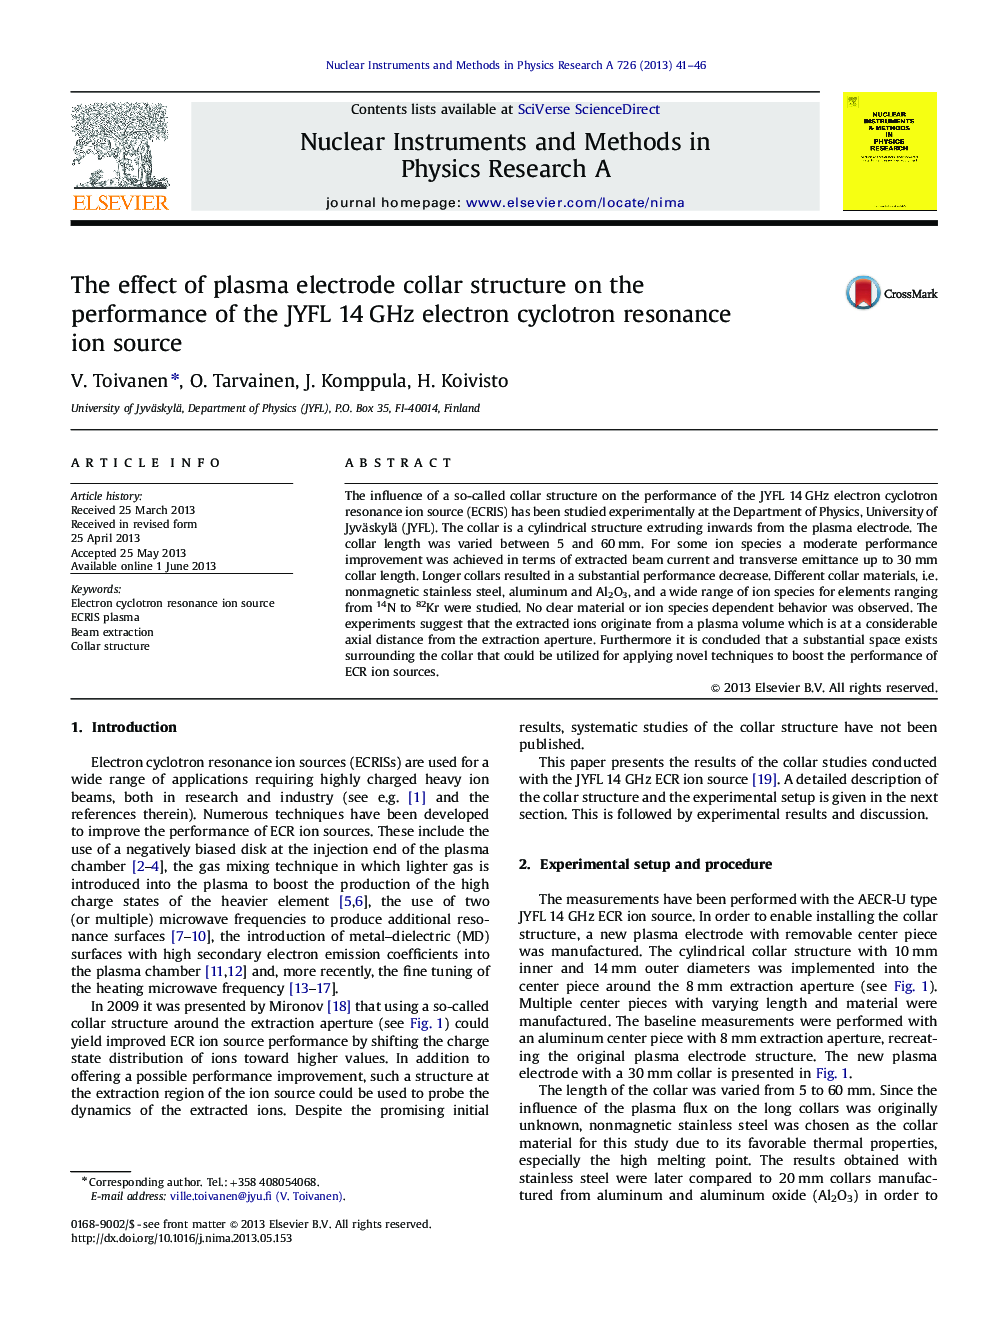 The effect of plasma electrode collar structure on the performance of the JYFL 14Â GHz electron cyclotron resonance ion source